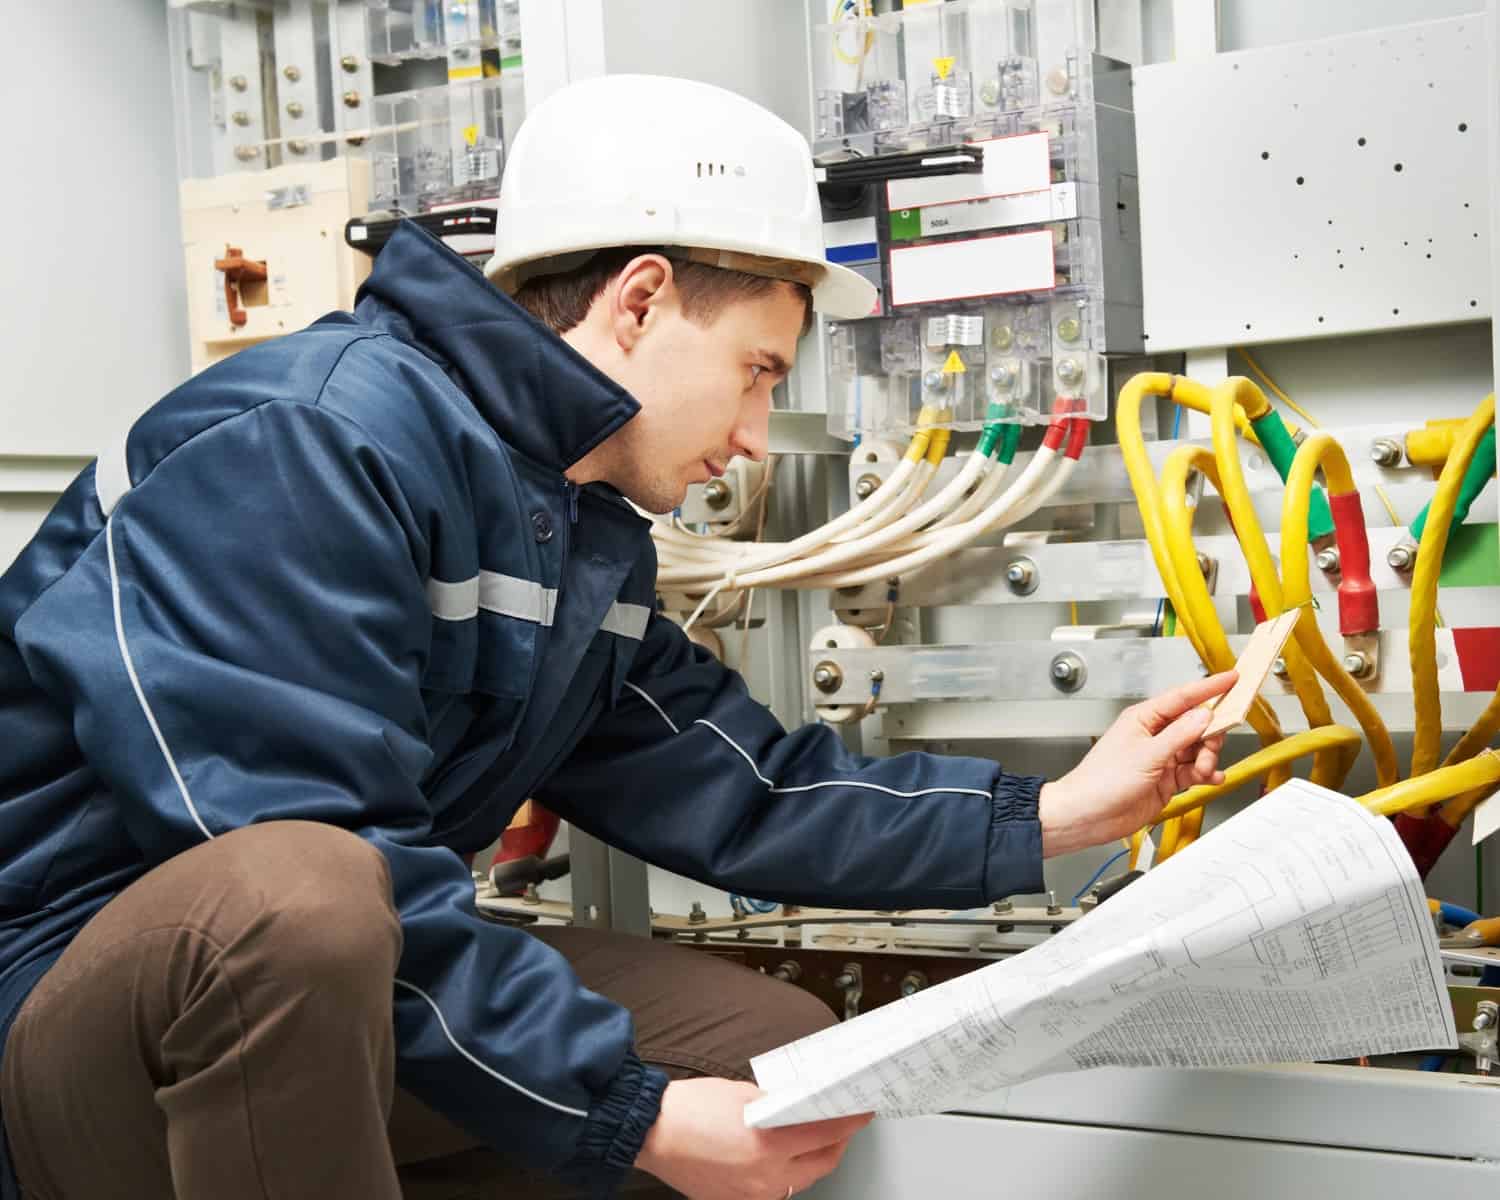 An Electrician Is Pictured Working On Some Very Complicated Wiring And Circuitry.